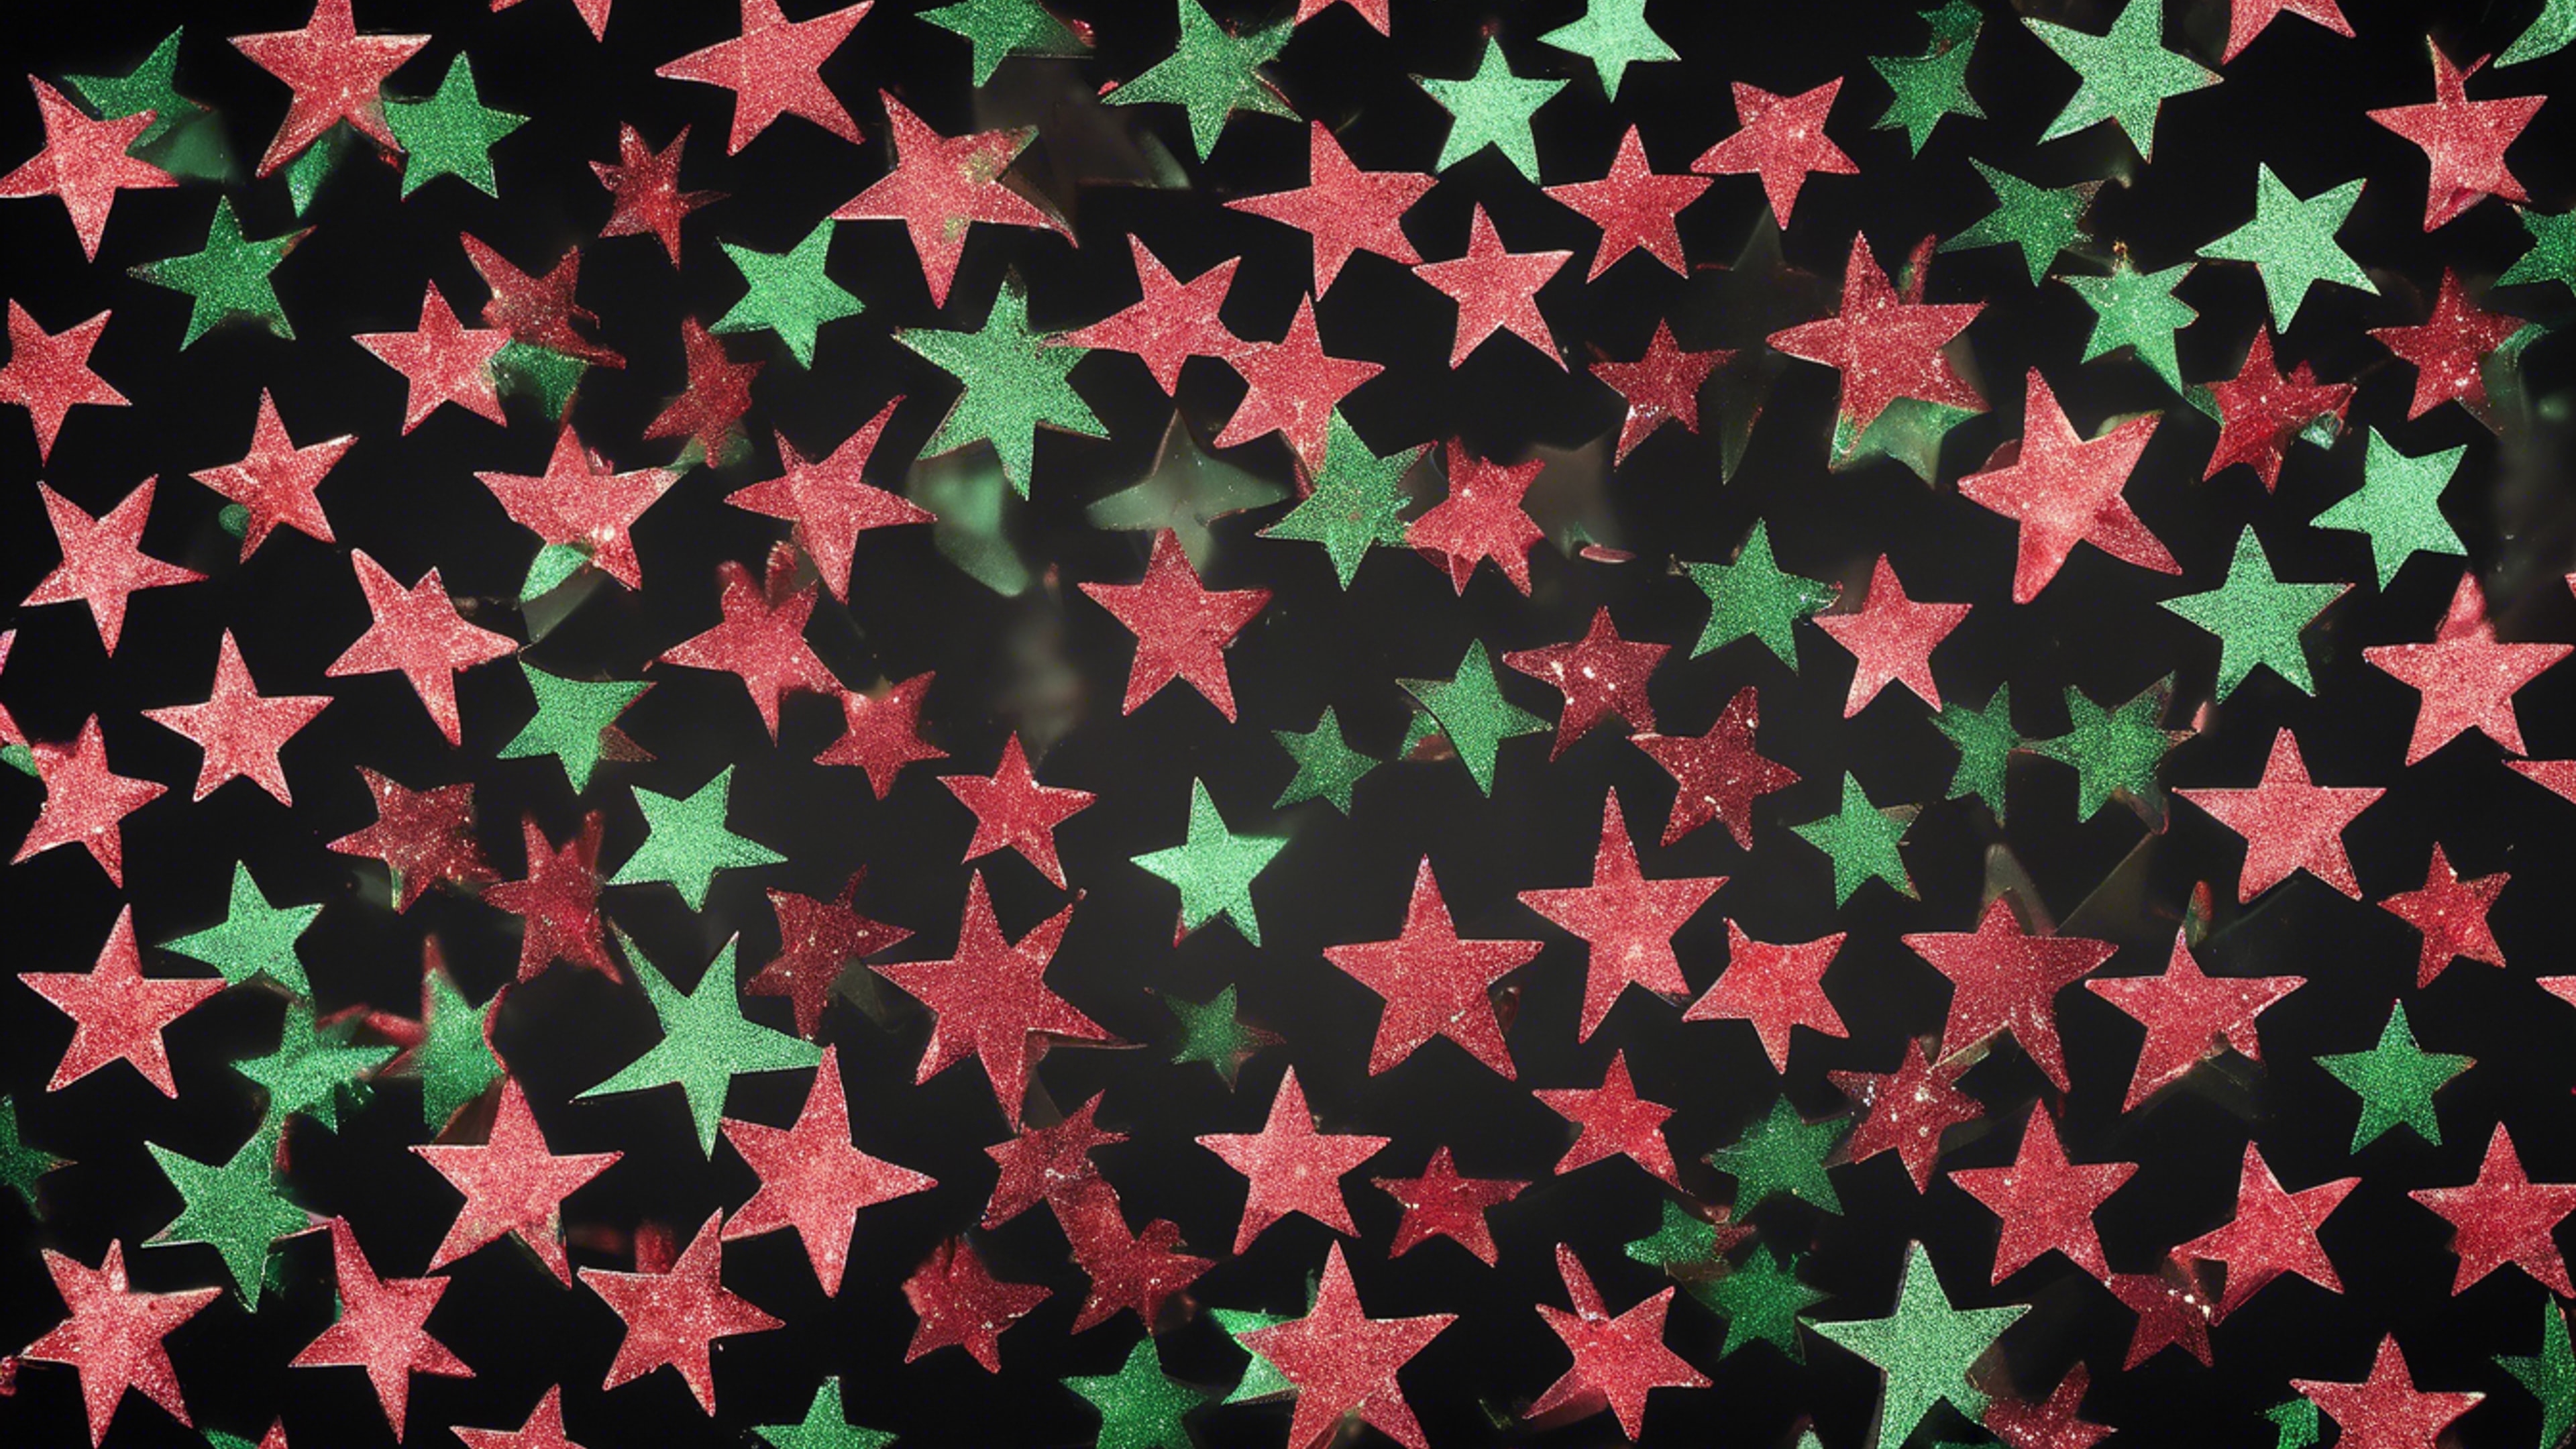 Green and red glitter forming star shapes on a black background Обои[2fe752b5dc5f4f35ba35]